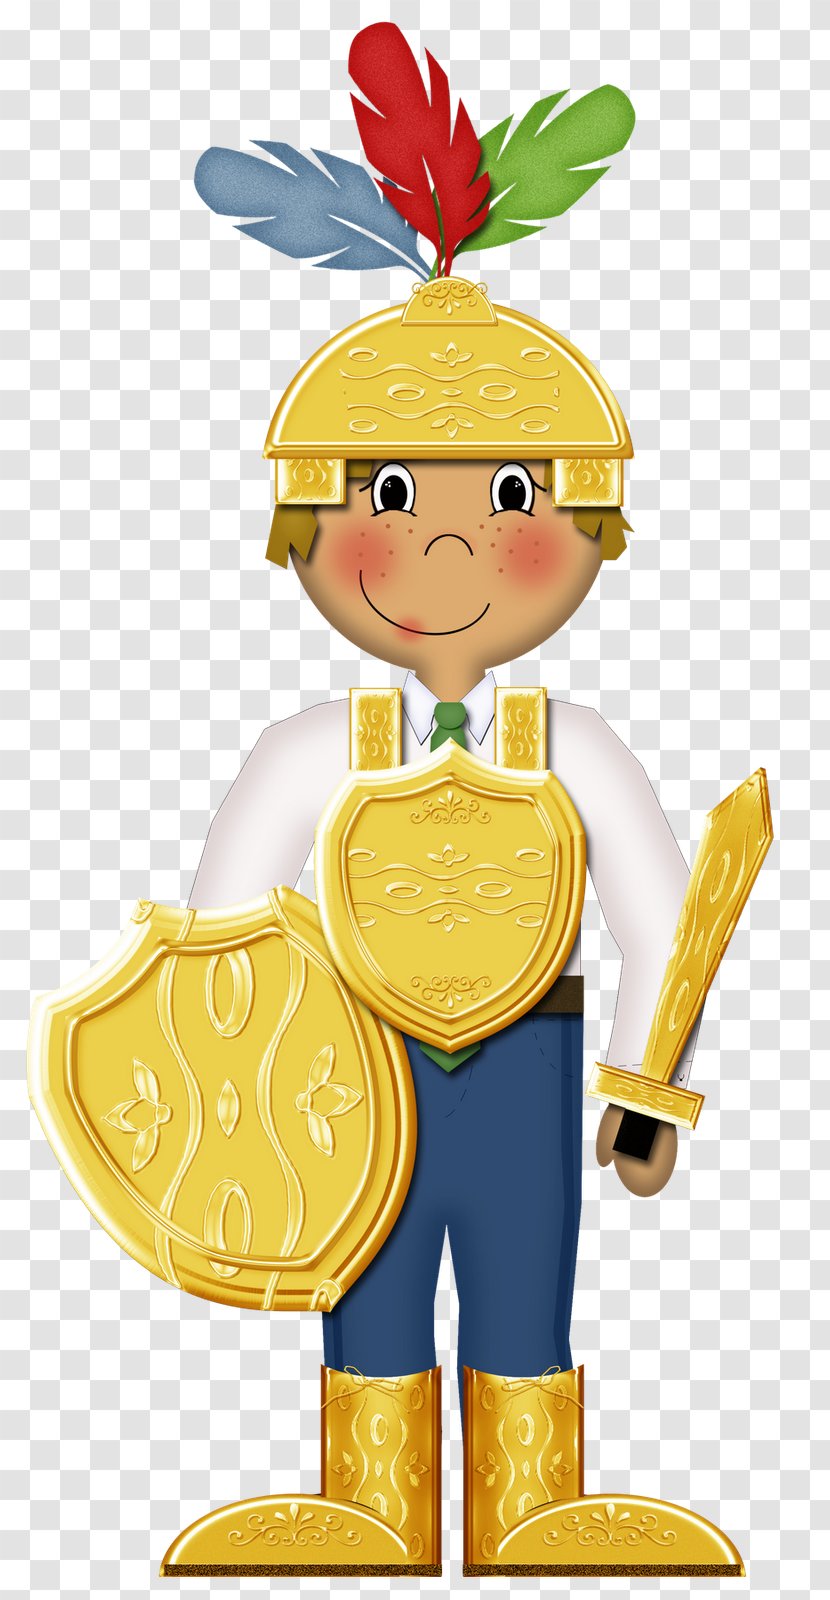 Drawing Doll Clip Art - Armor Of God Transparent PNG